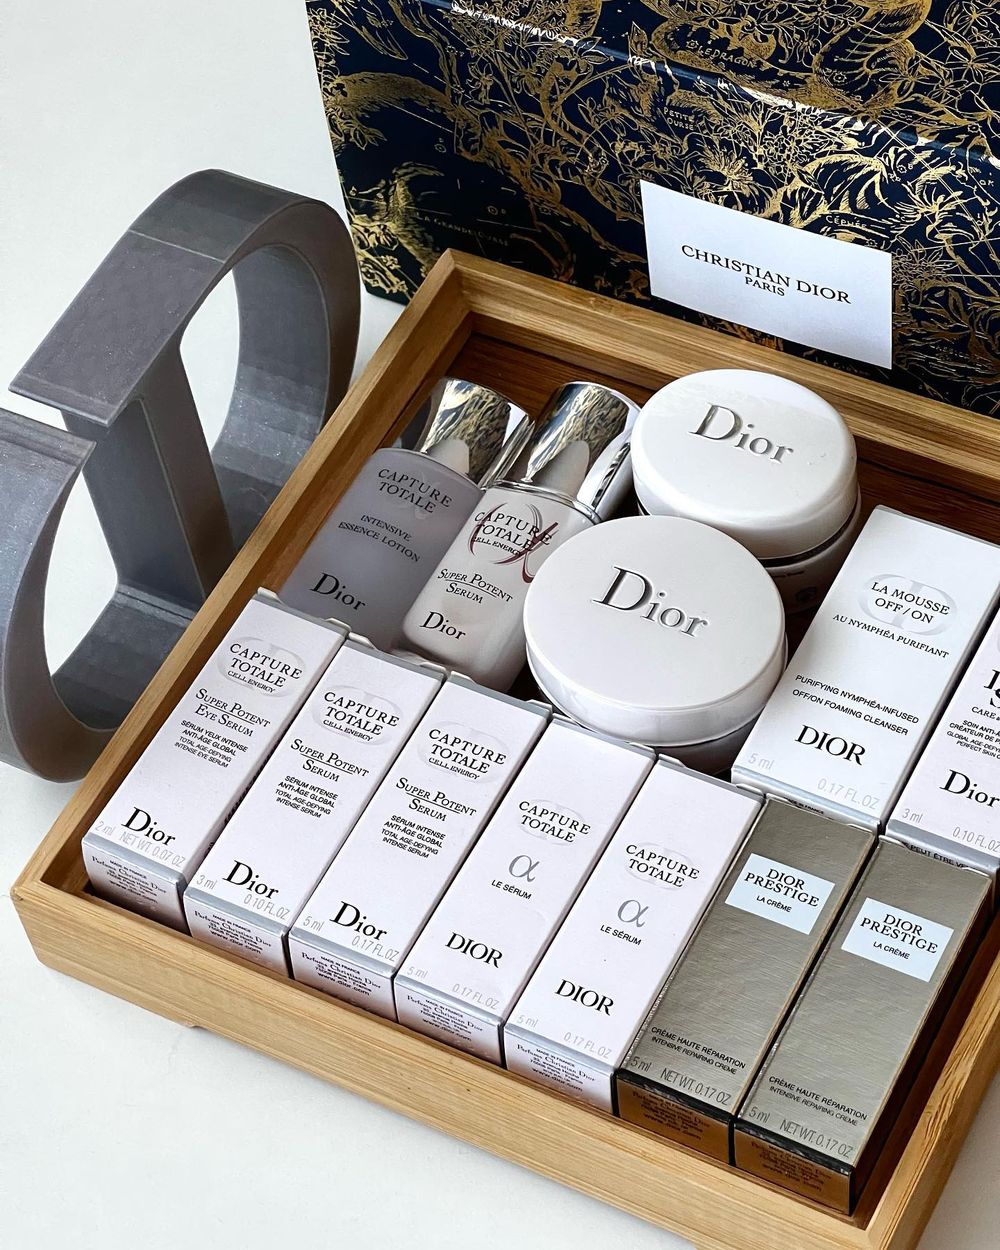 15 Best Dior Skincare Products for High-End Care